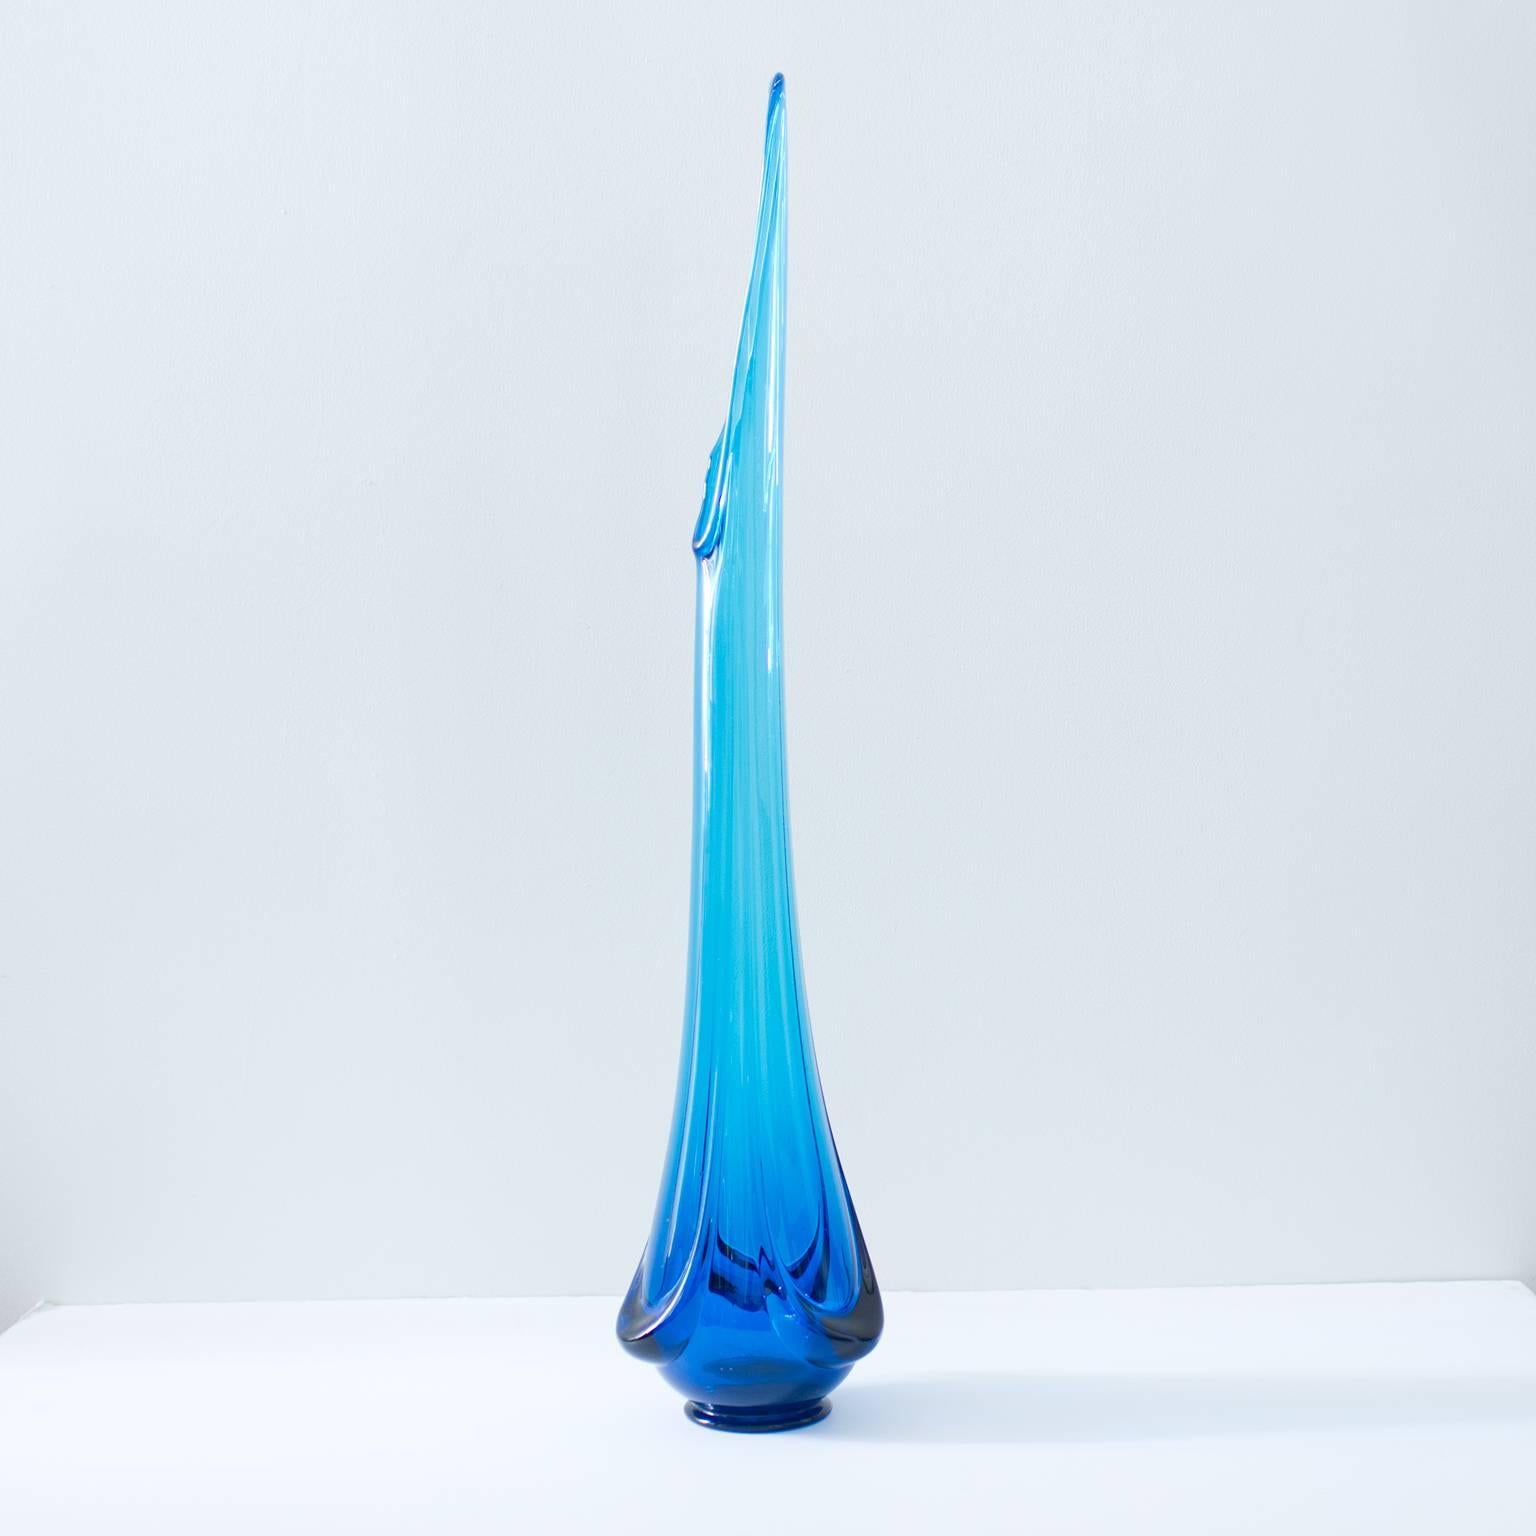 Mid-Century viking glass vase in blue, circa 1960s. This is a bold, electric blue accent to any room, measuring over 28